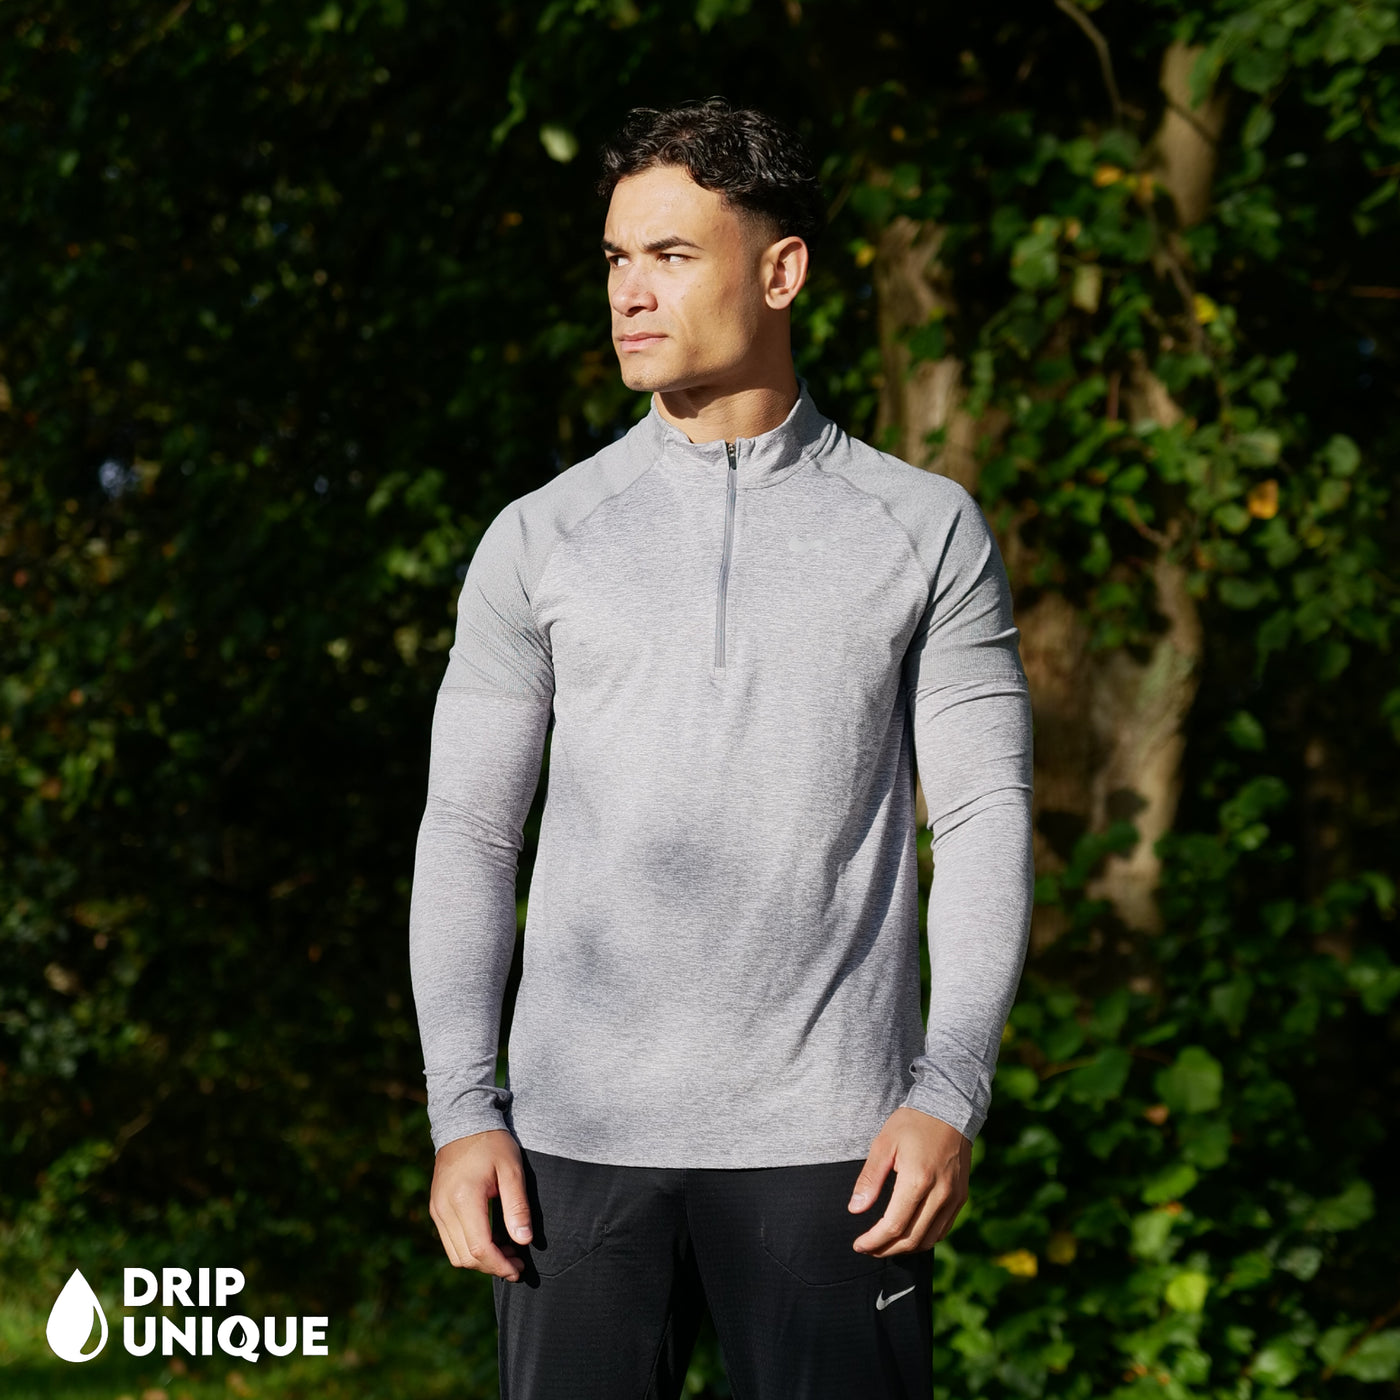 Men's Nike Therma 1/4 Zip Top in a Grey colourway showing the front design, dripuniqueuk